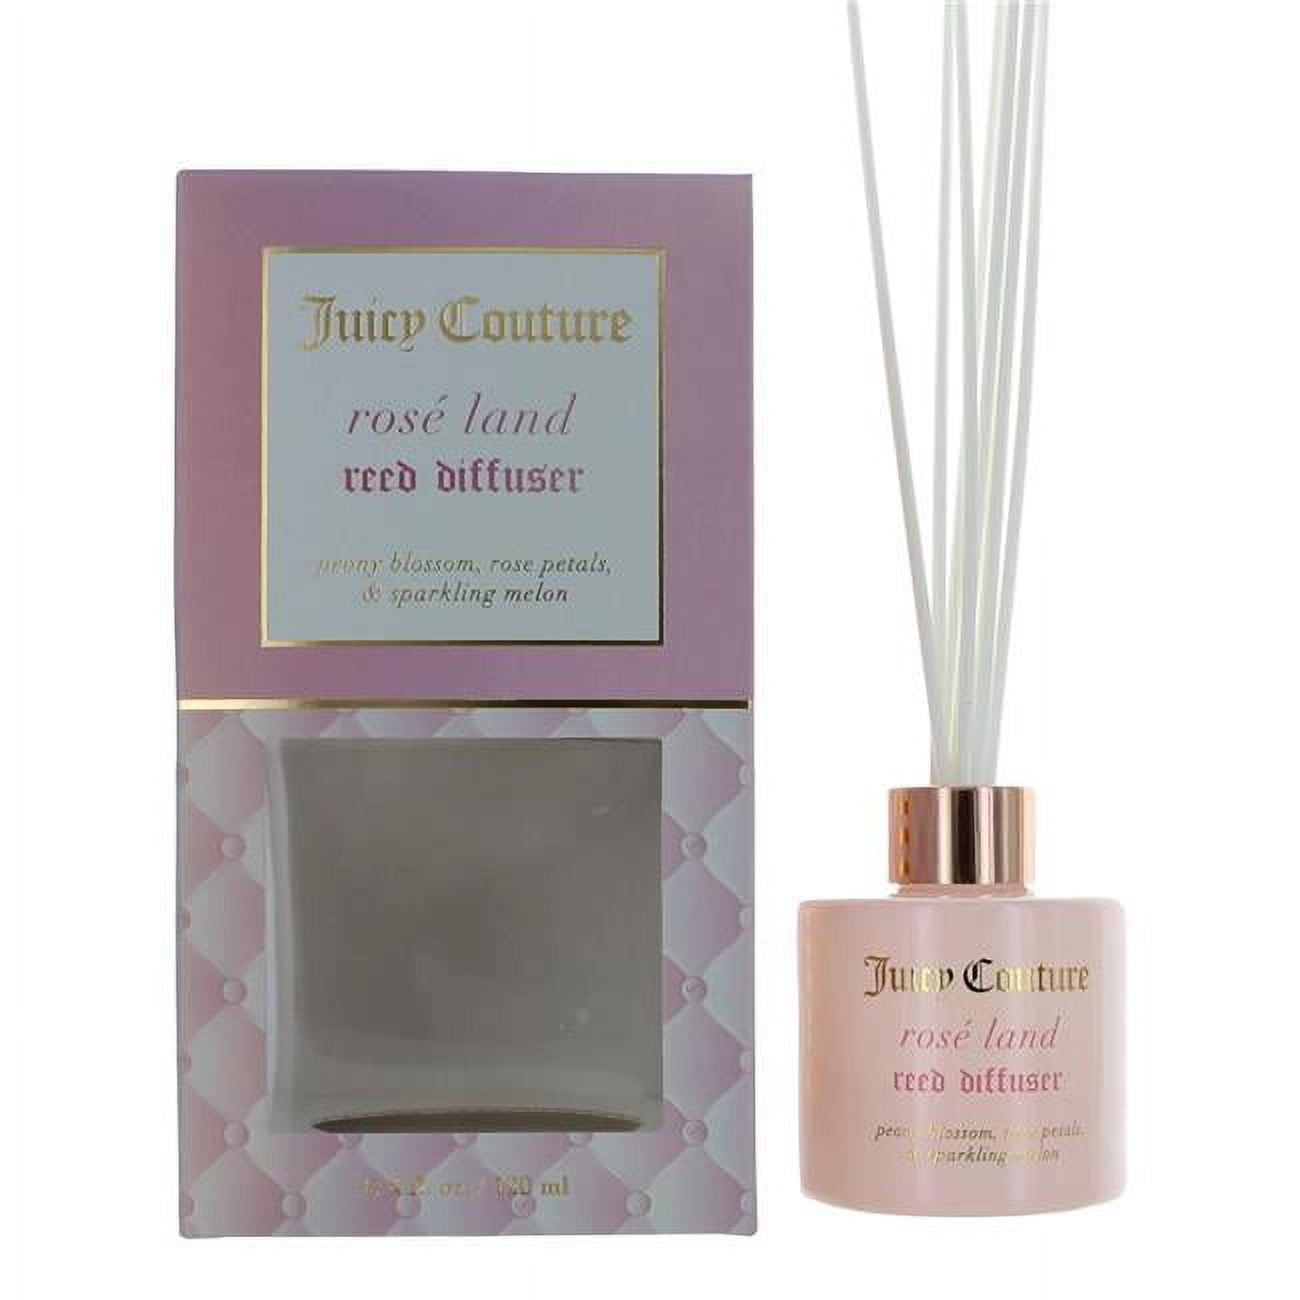  Juicy Couture: Home & Kitchen